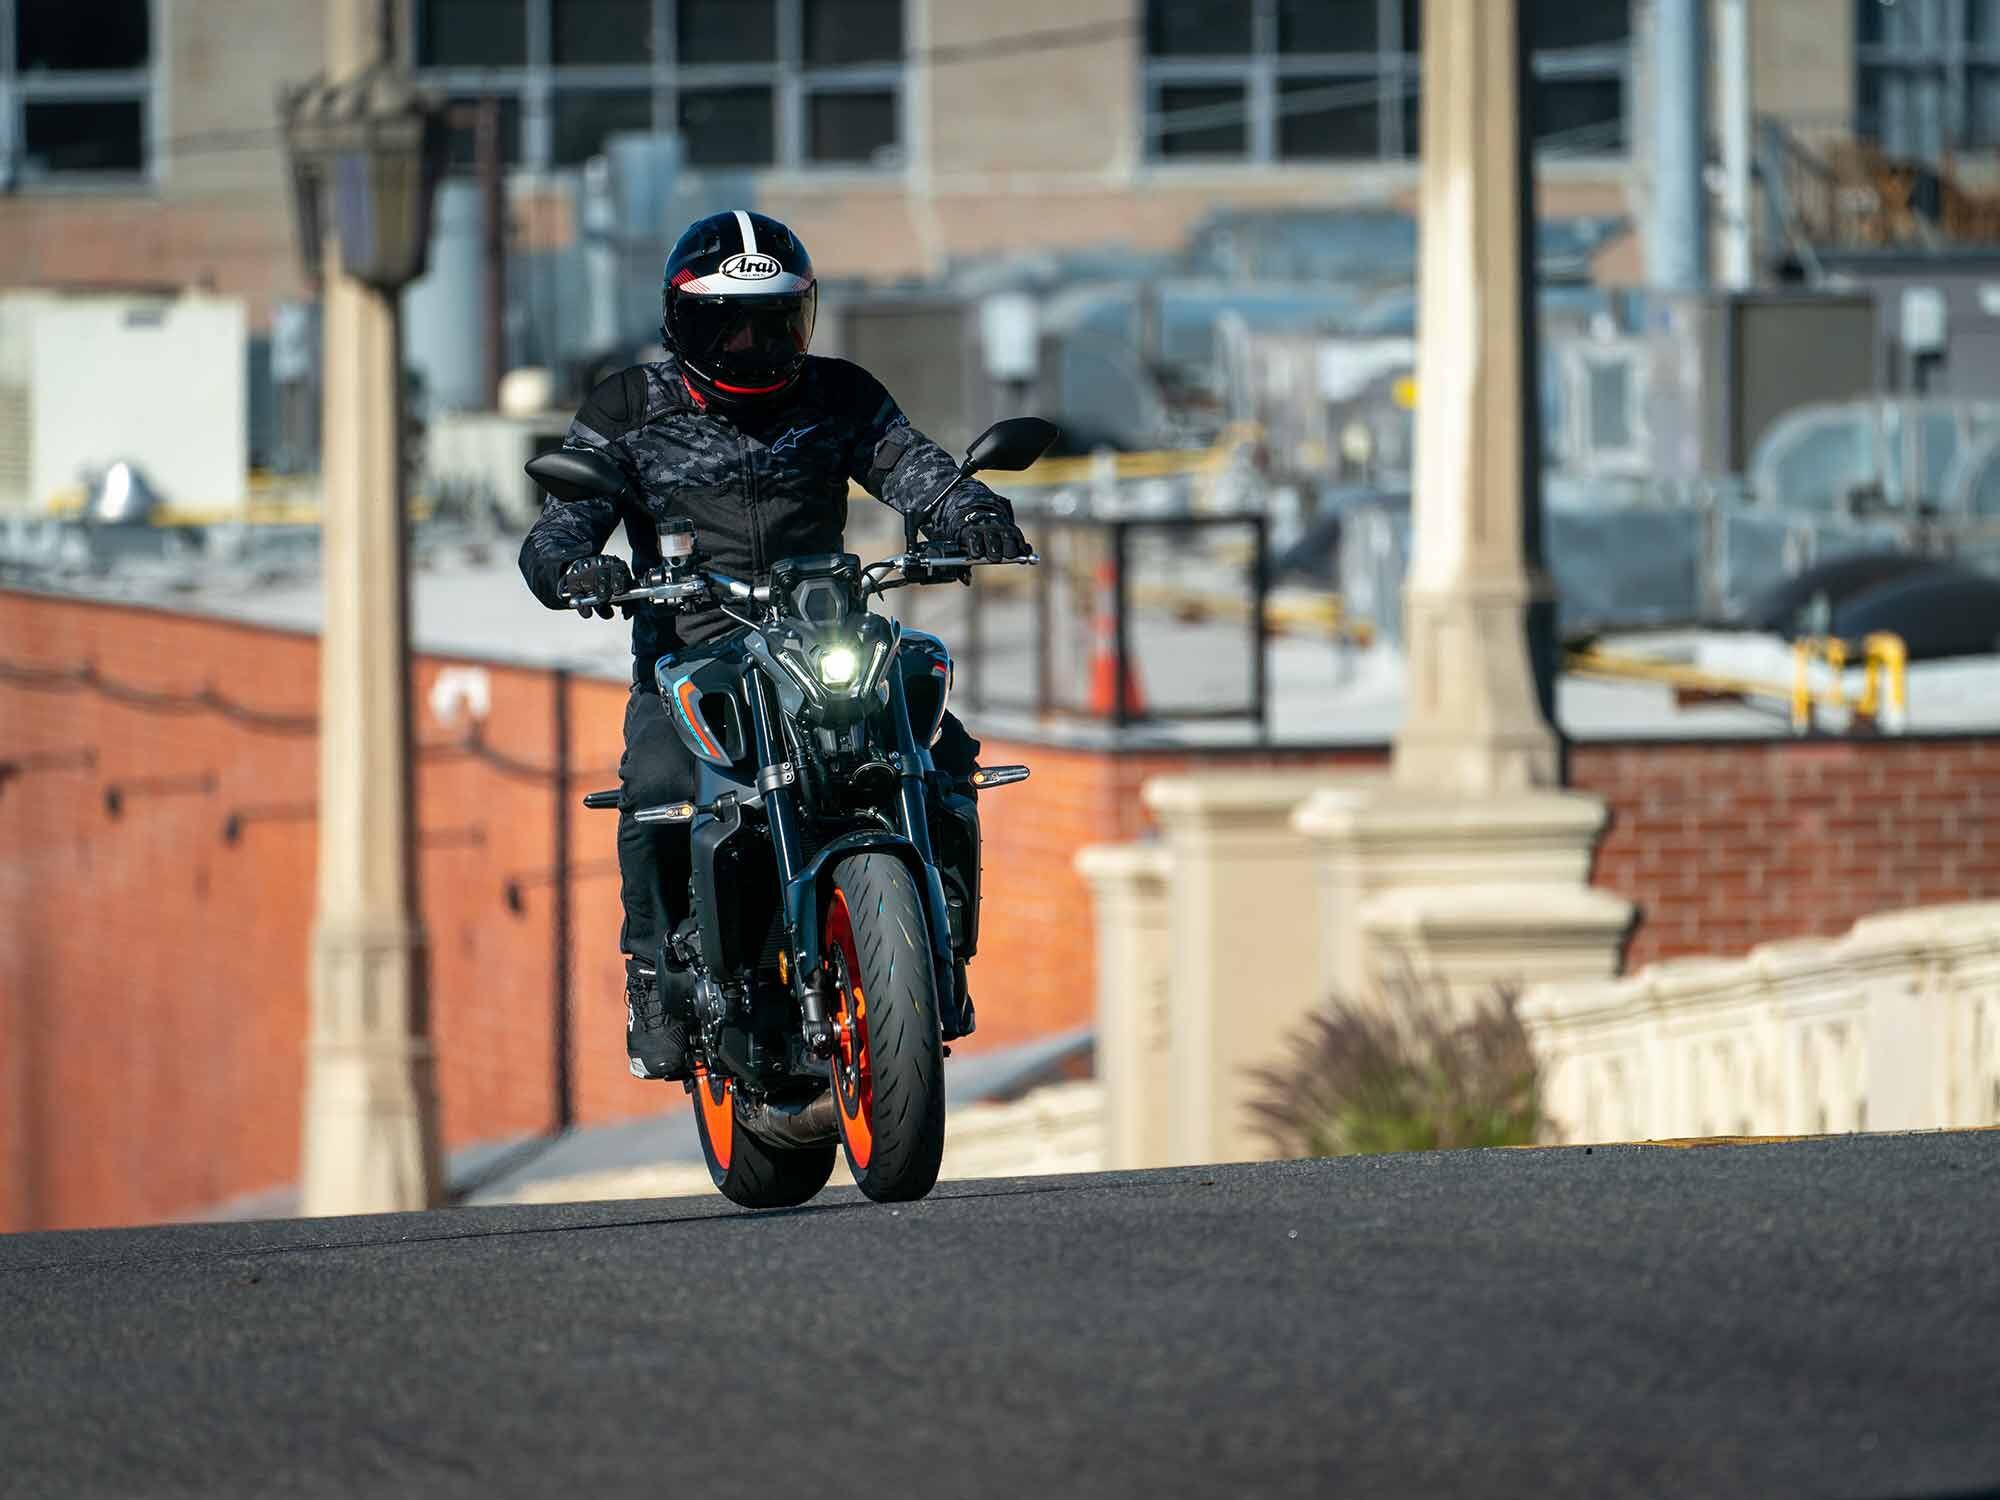 Despite its engine size, the MT-09 feels lighter and more nimble than its displacement implies.